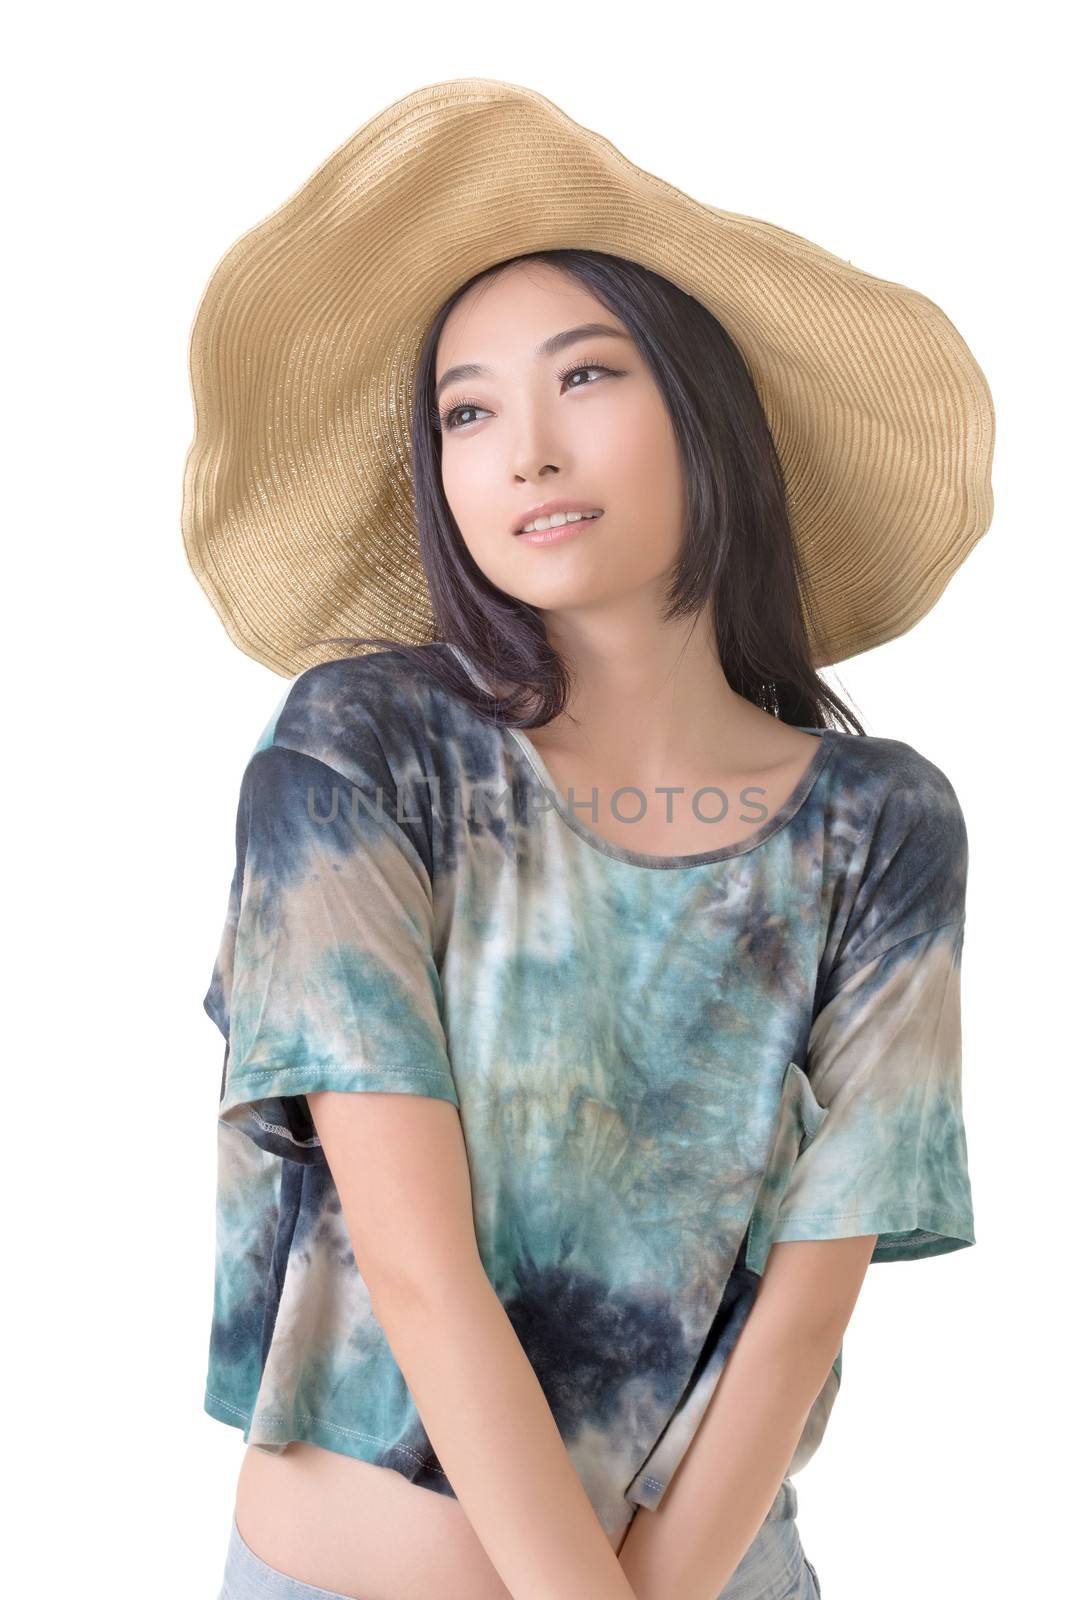 Glamour of Asian beauty with hat, closeup portrait.